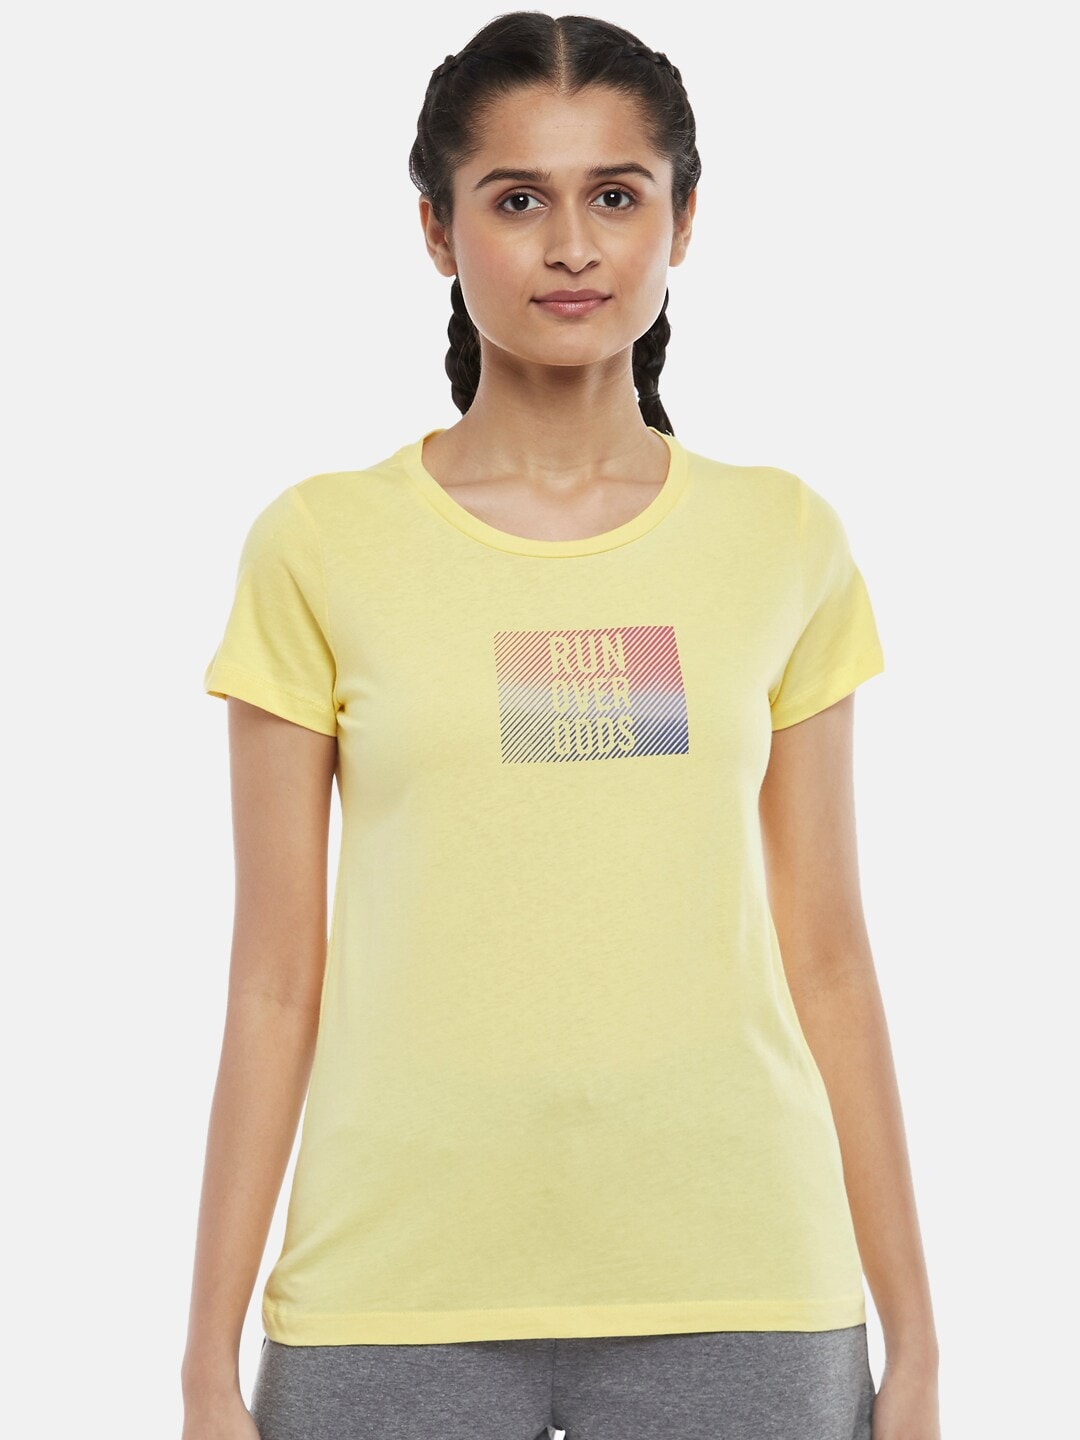 Ajile by Pantaloons Women Yellow Typography Printed Outdoor Cotton T-shirt Price in India